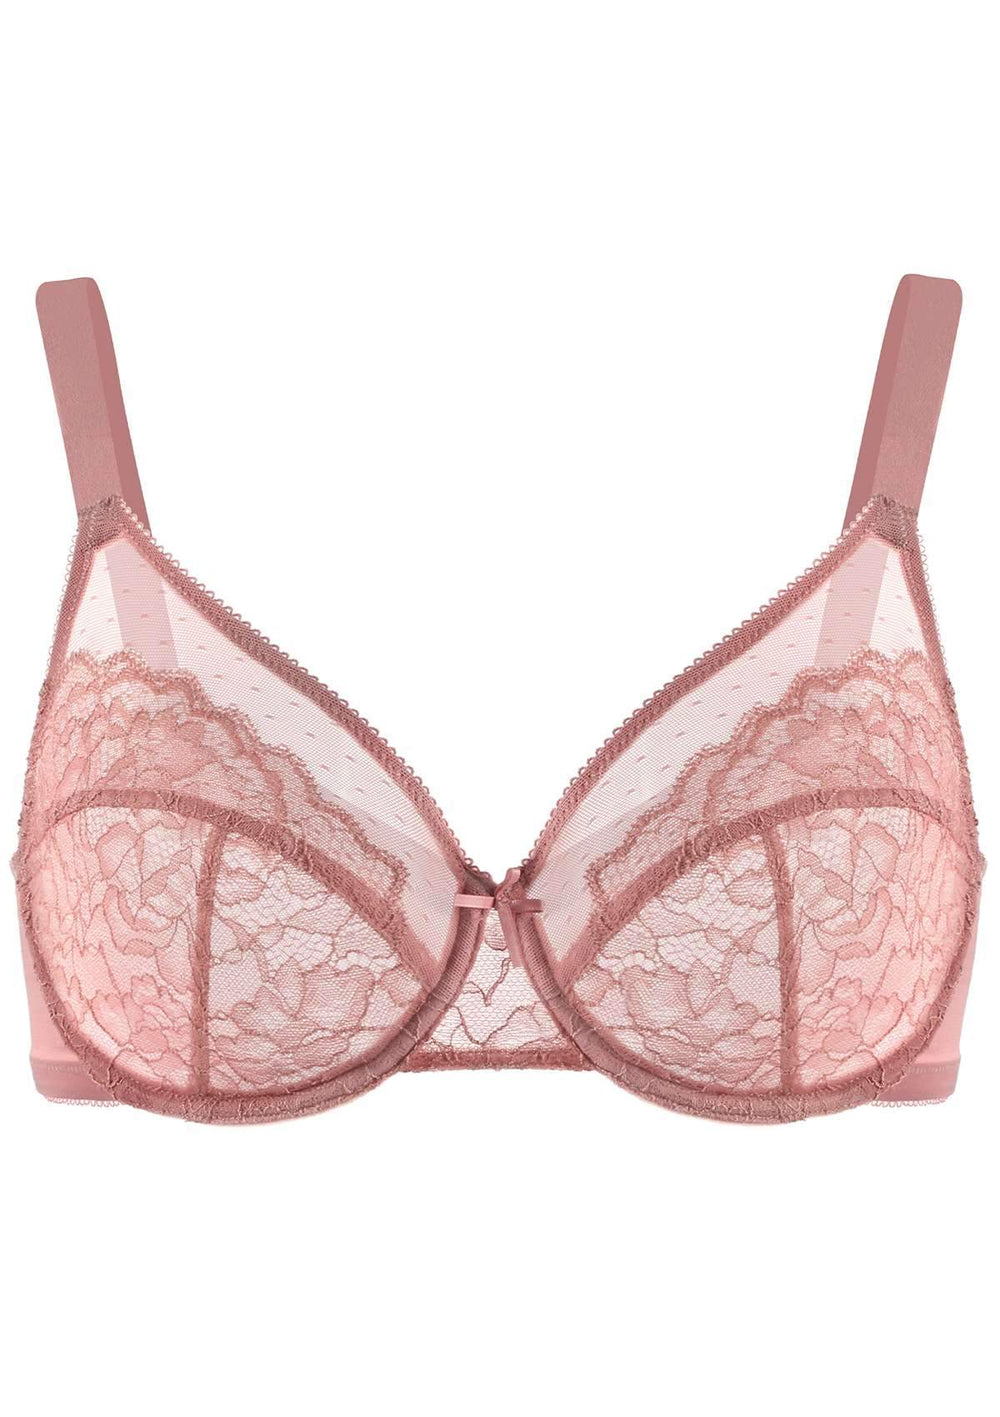 Coral Lace Watson Bra (+ upcoming workshops!)